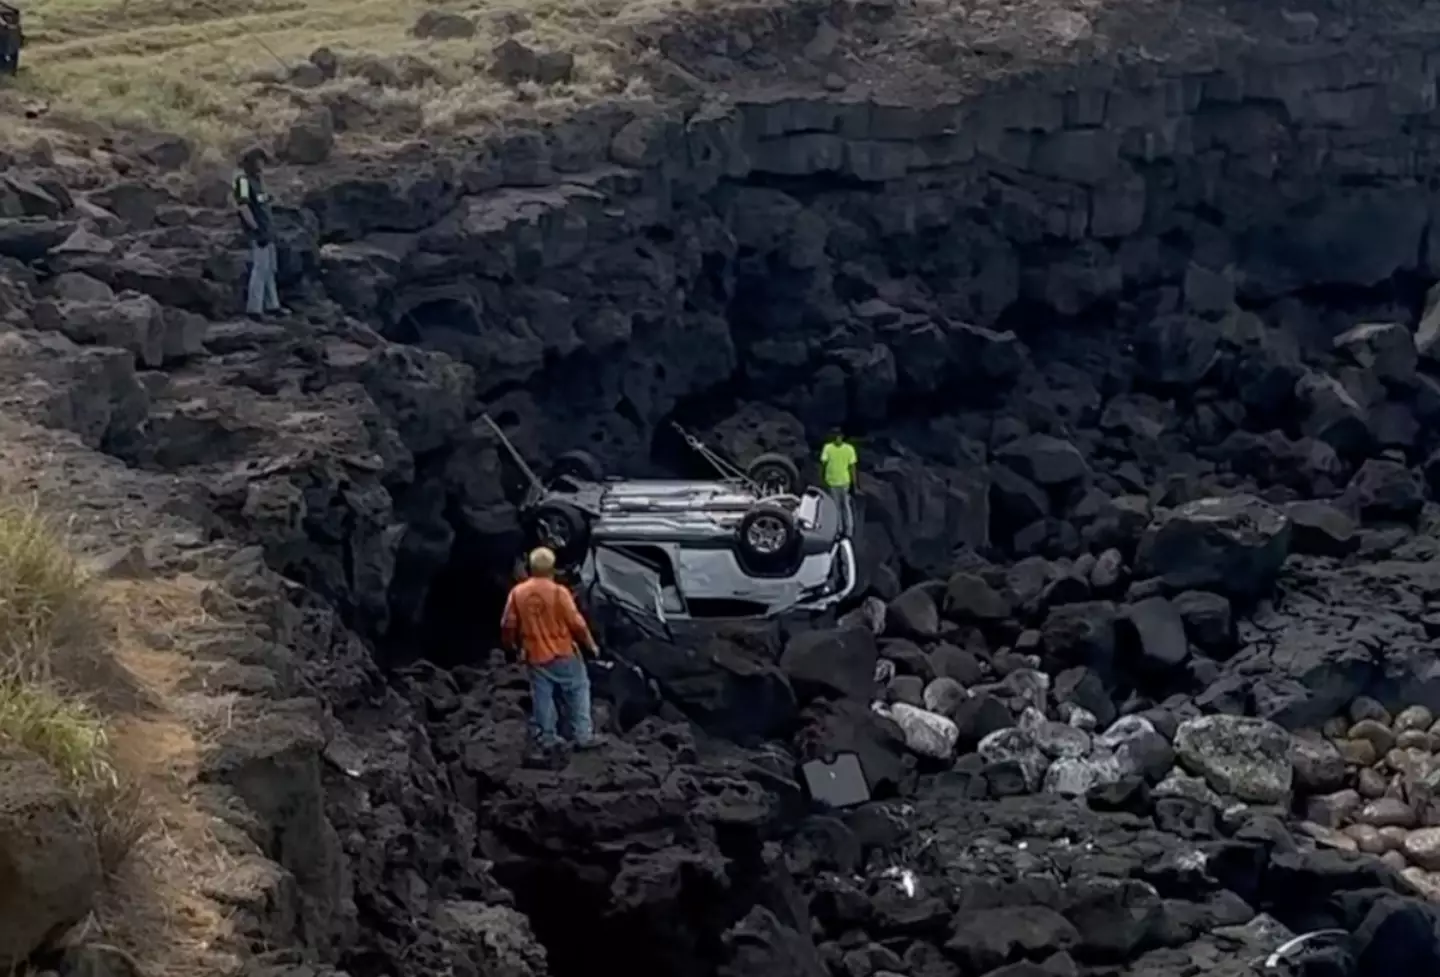 The tourist drove off a 60-foot cliff.